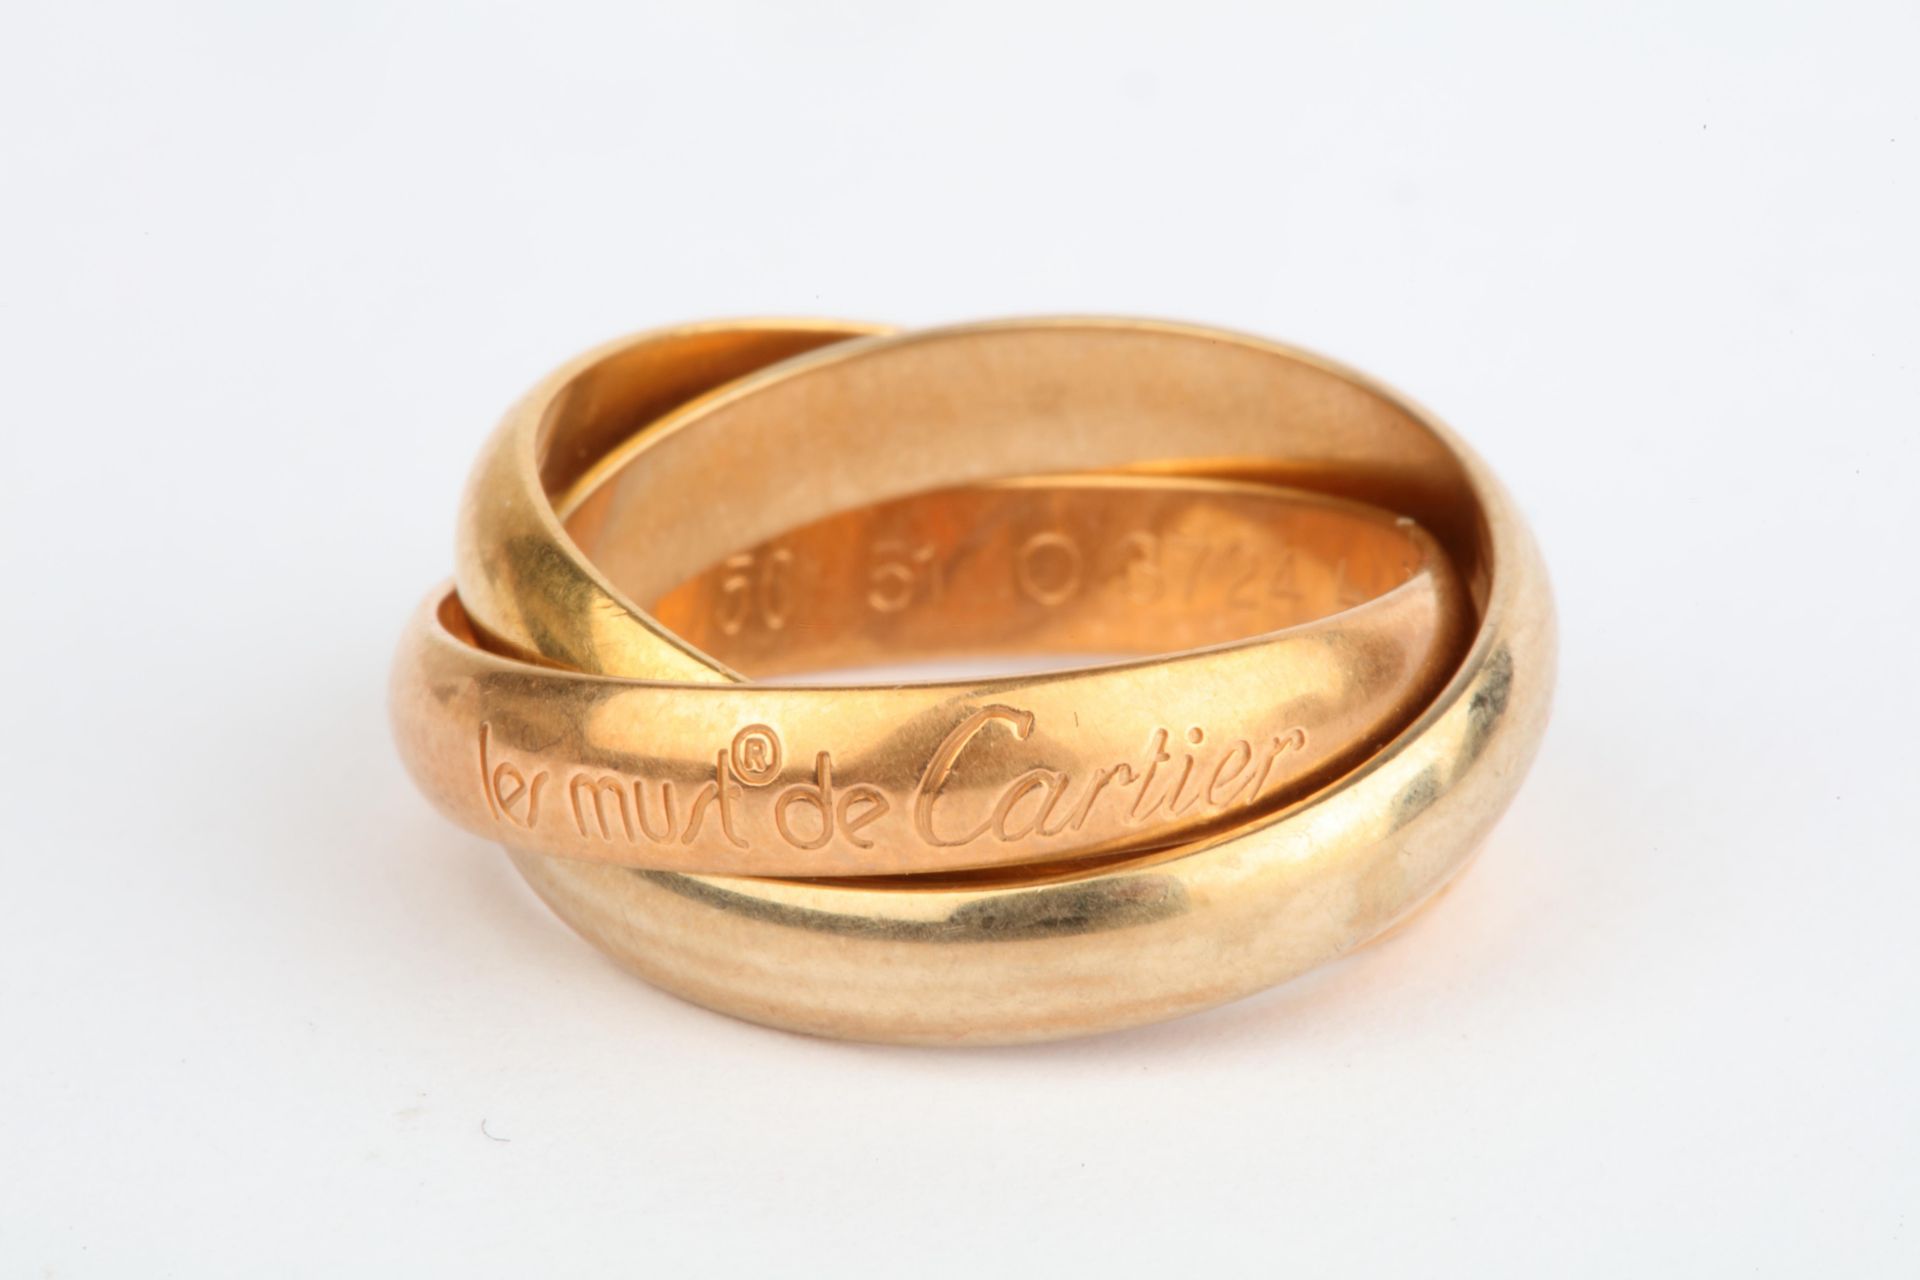 No VAT Cartier Tri Gold Trinity Ring With 18k Yellow Gold, White Gold And Rose Gold - Image 2 of 2